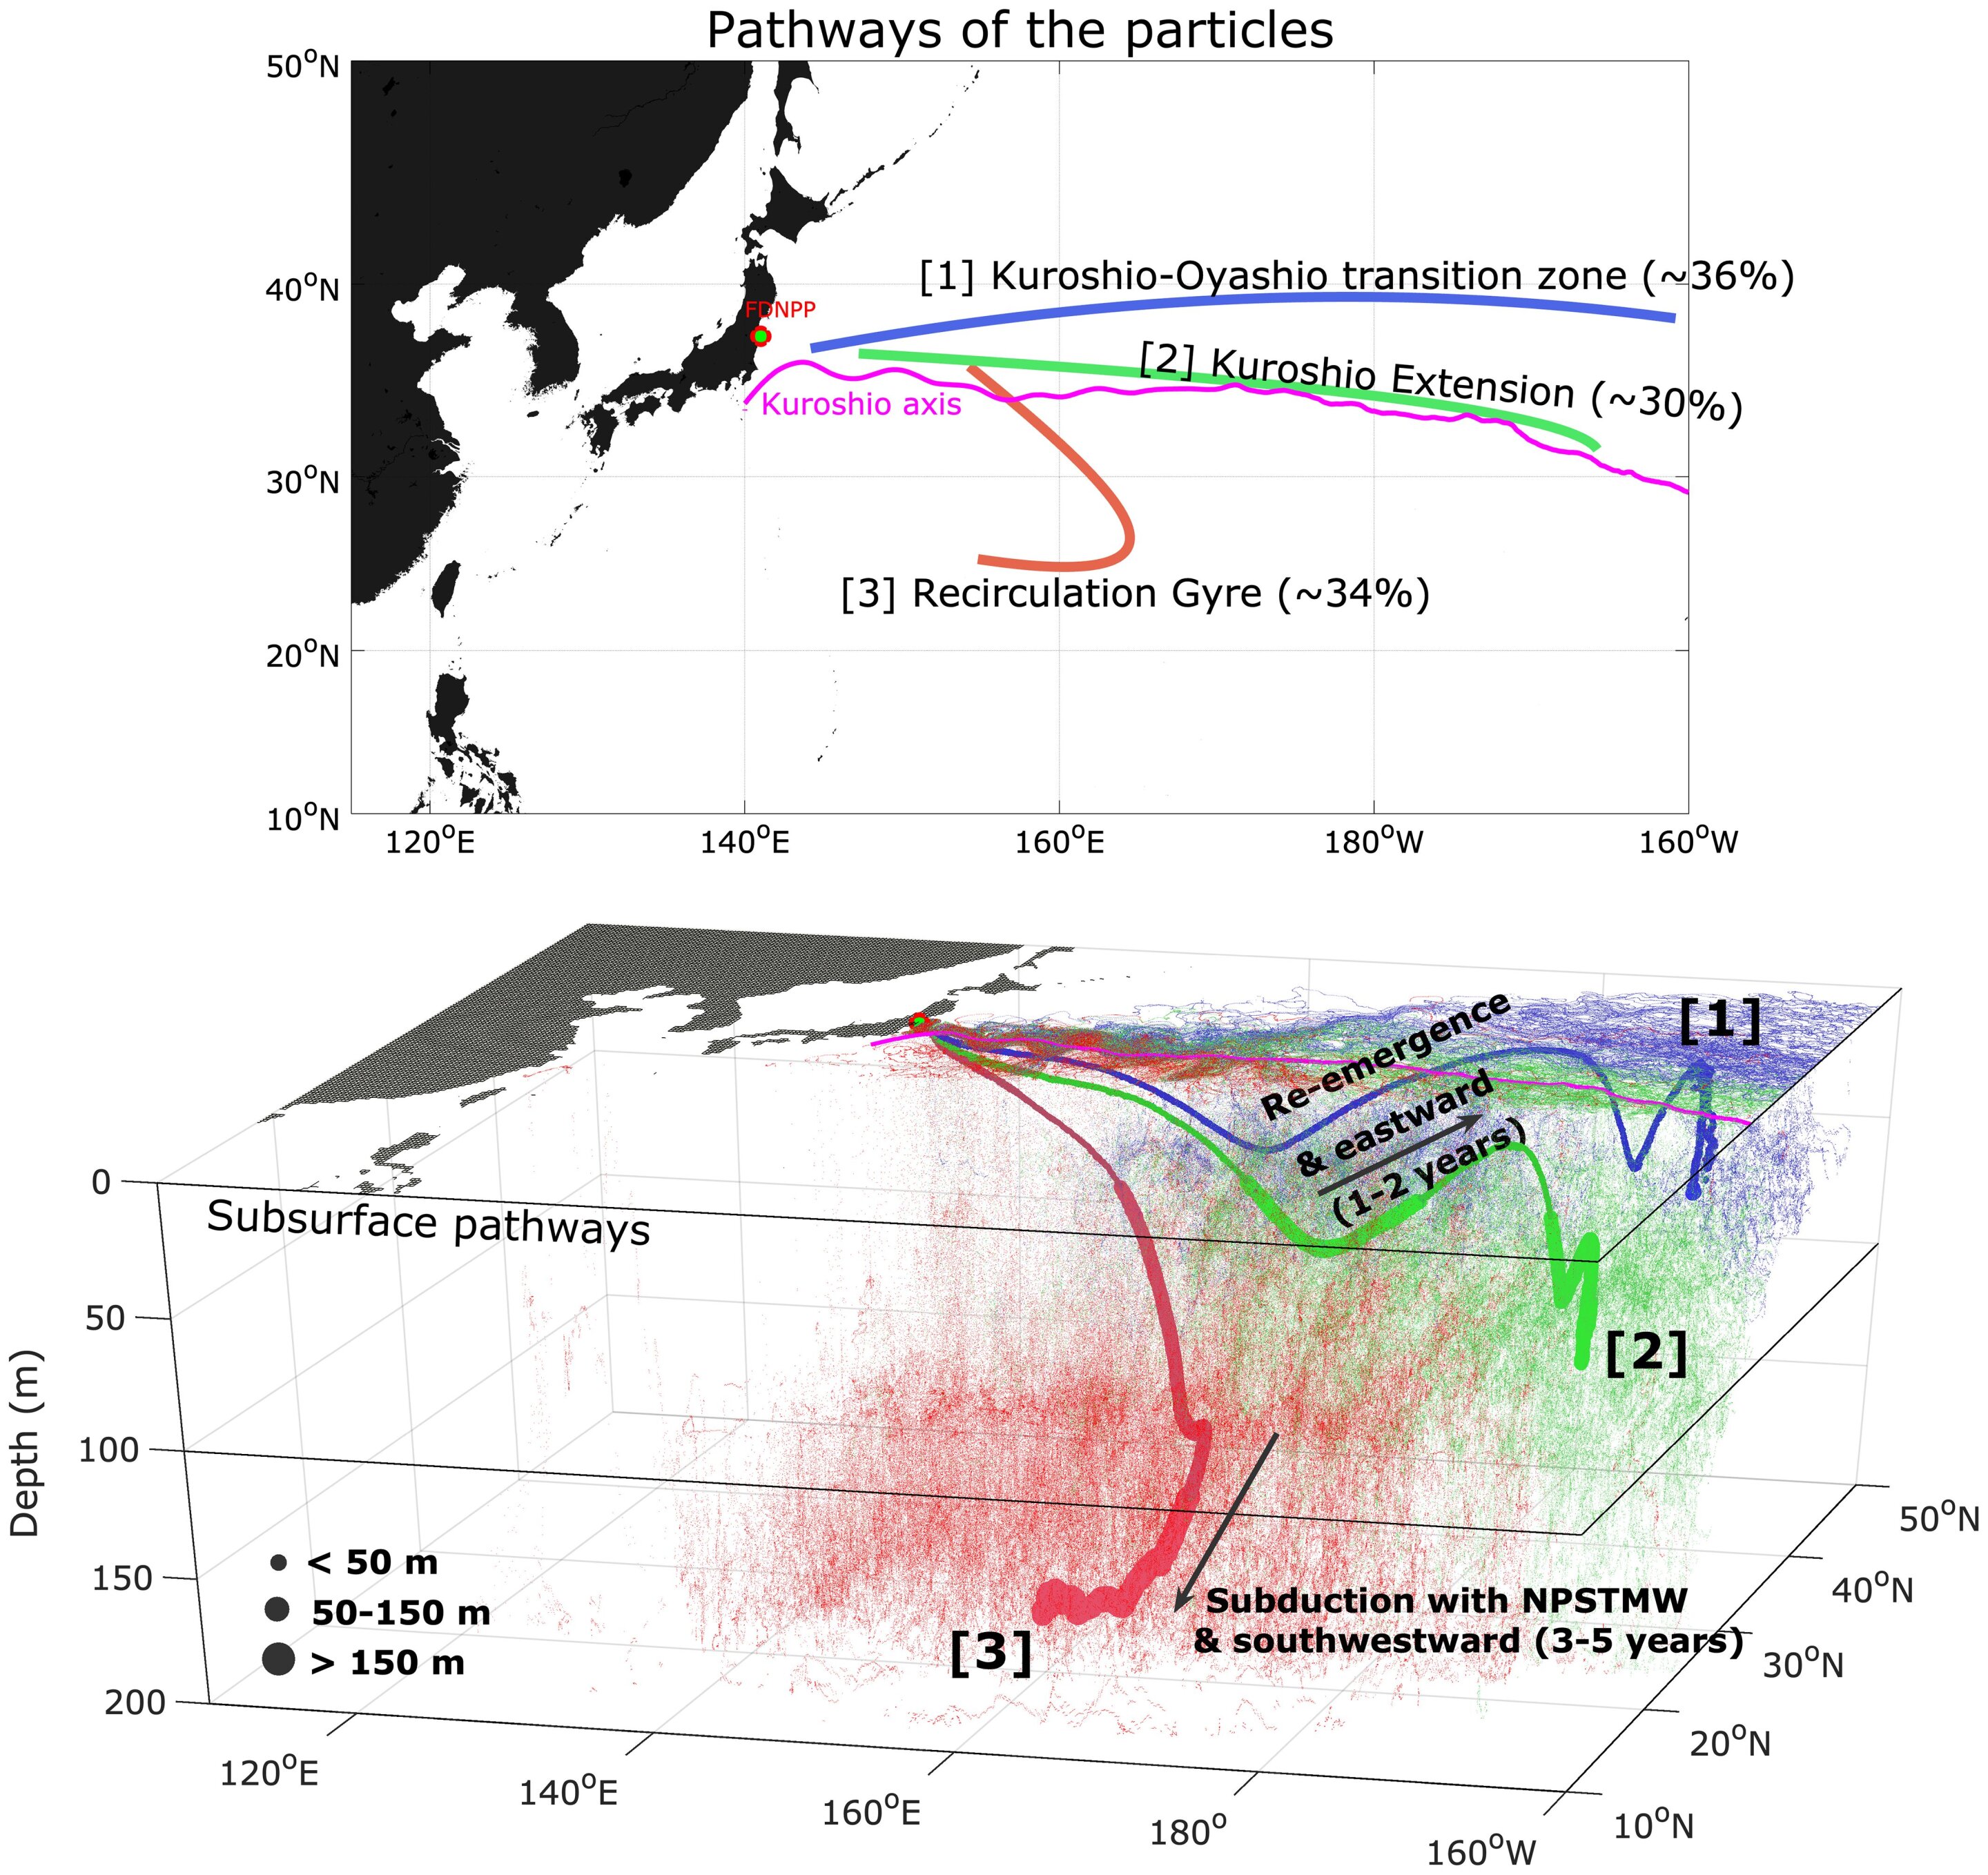 Fukushima fallout transport longevity revealed by North Pacific ocean circulation patterns